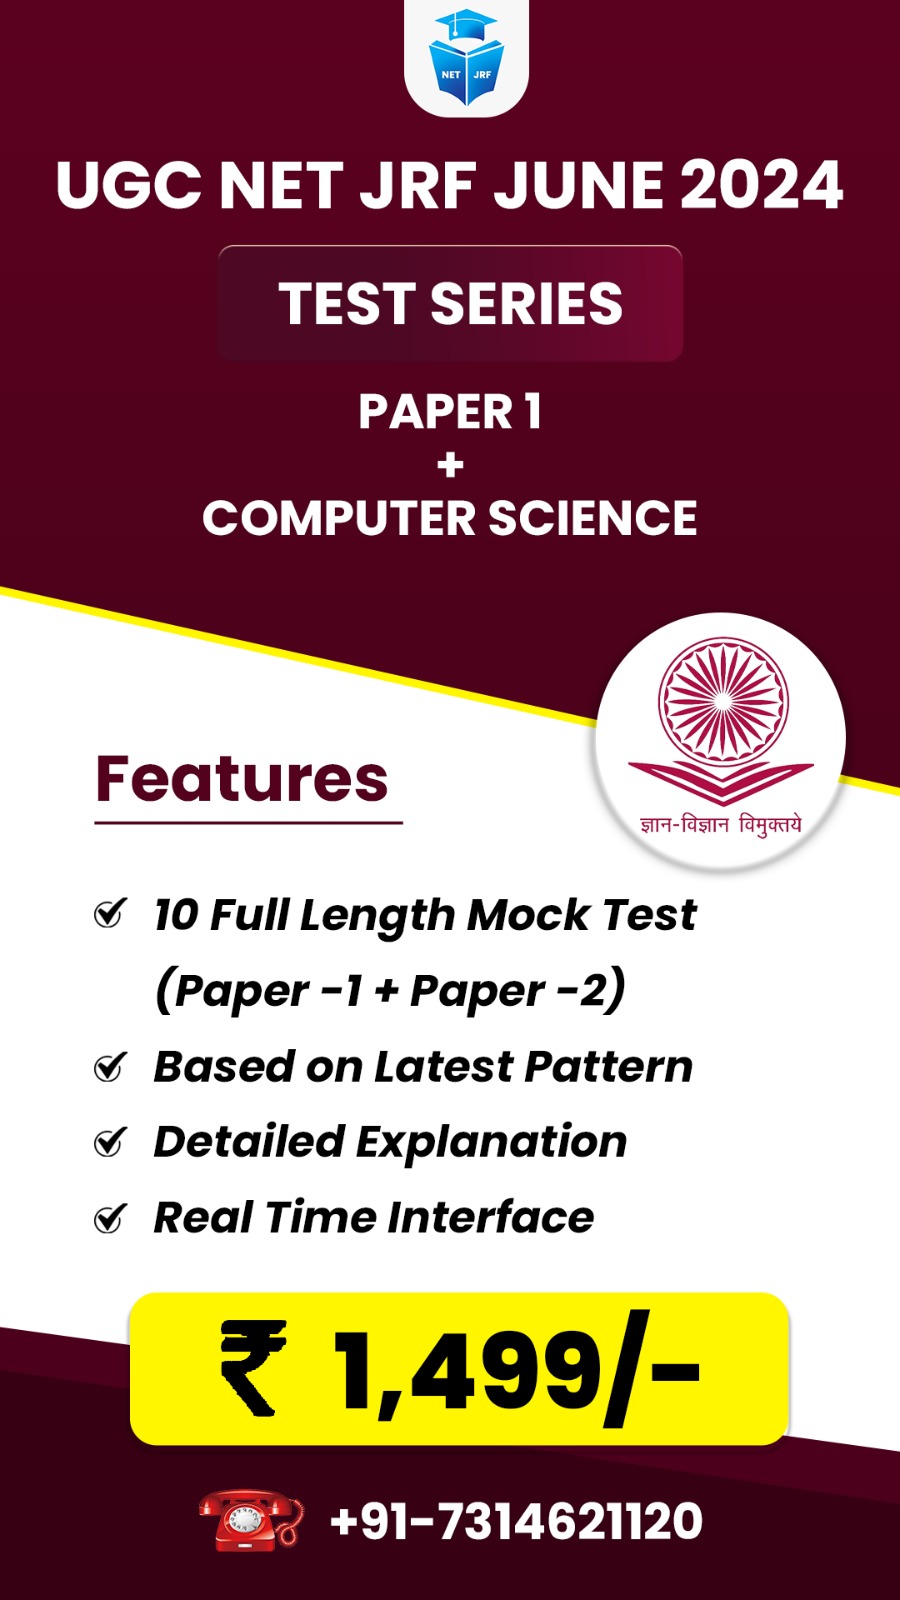 Computer Science (Paper 1 + Paper 2) Test Series for June 2024